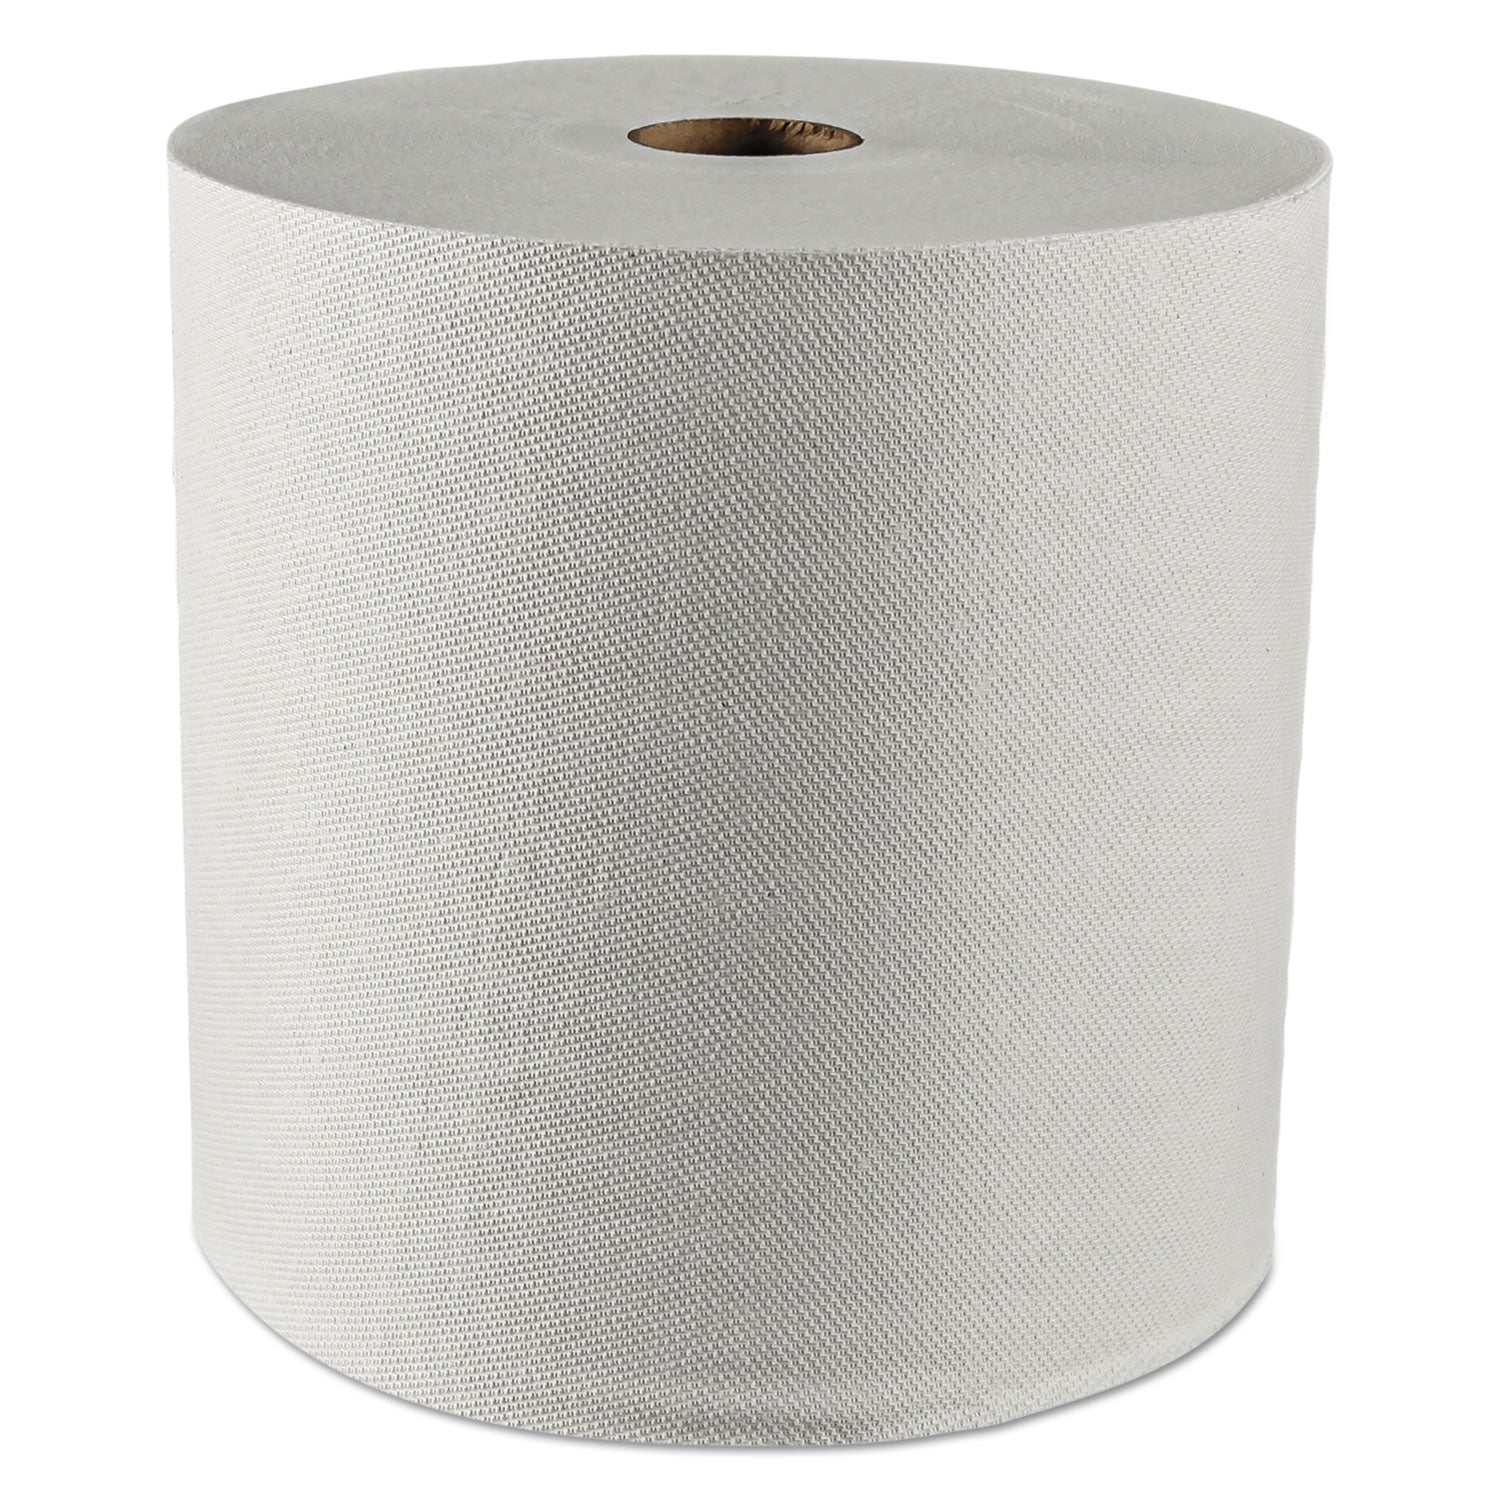 Hard Roll Paper Towels with Premium Absorbency Pockets, 1-Ply, 8" x 425 ft, 1.5" Core, White, 12 Rolls/Carton - 